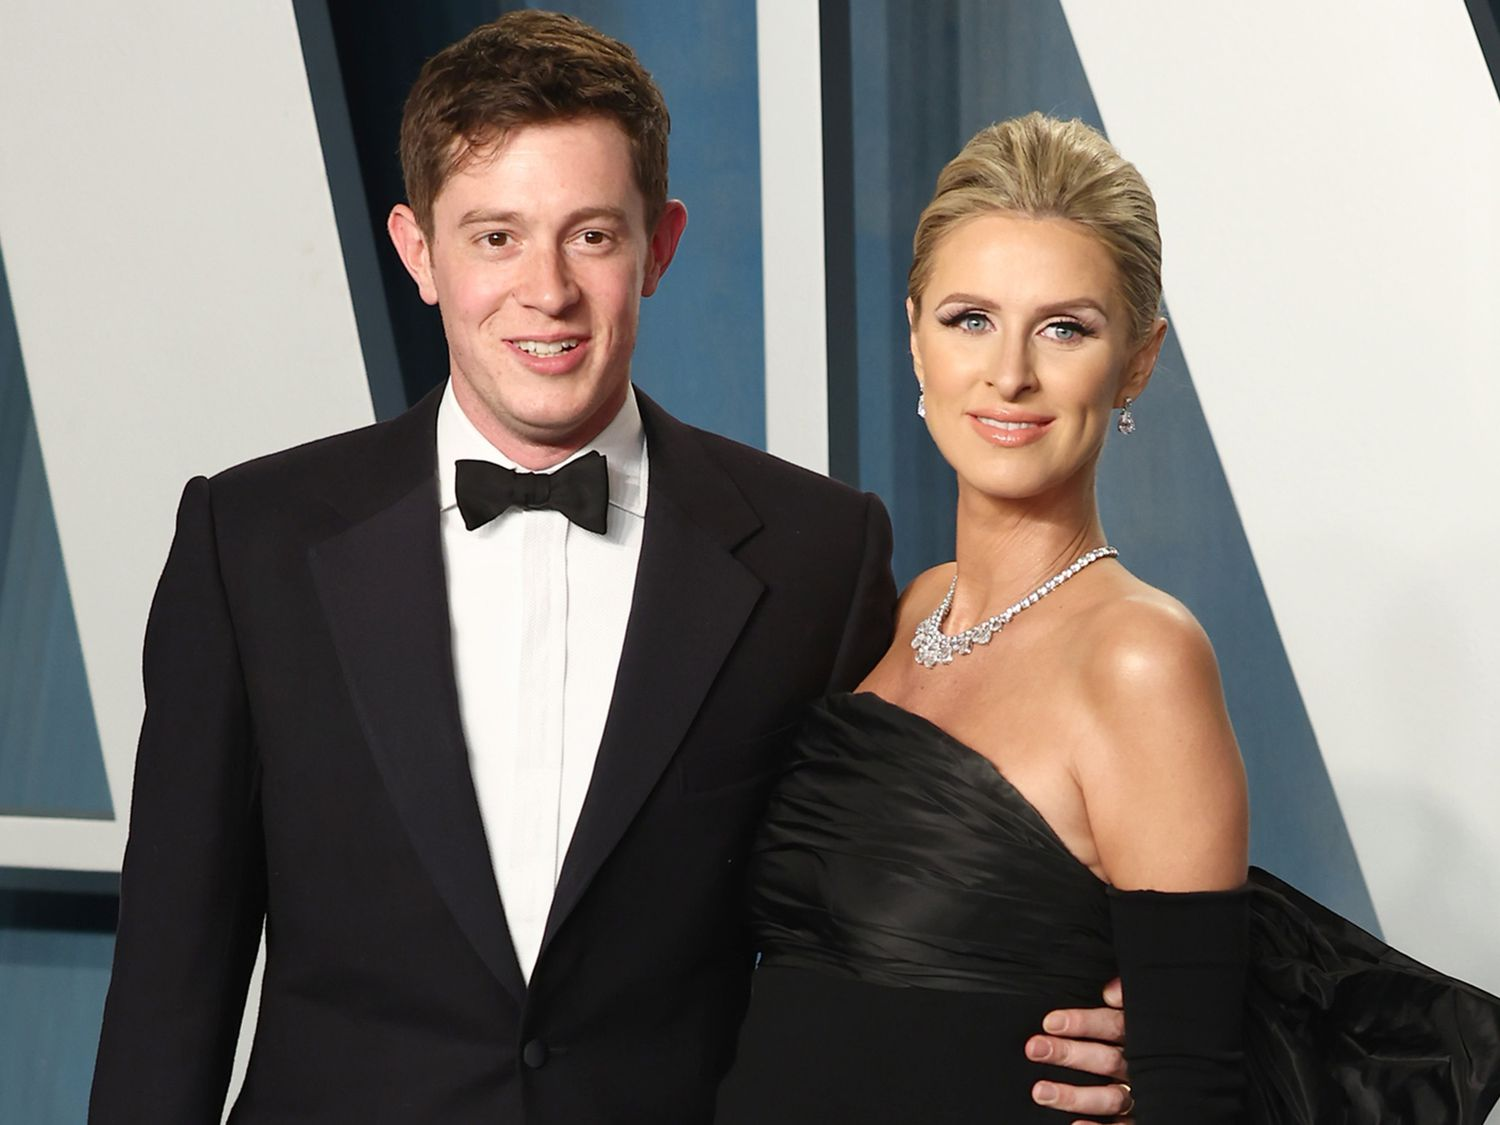 Nicky Hilton Biography: Net Worth, Pictures, Husband, Age, Height, Instagram, Siblings, Parents